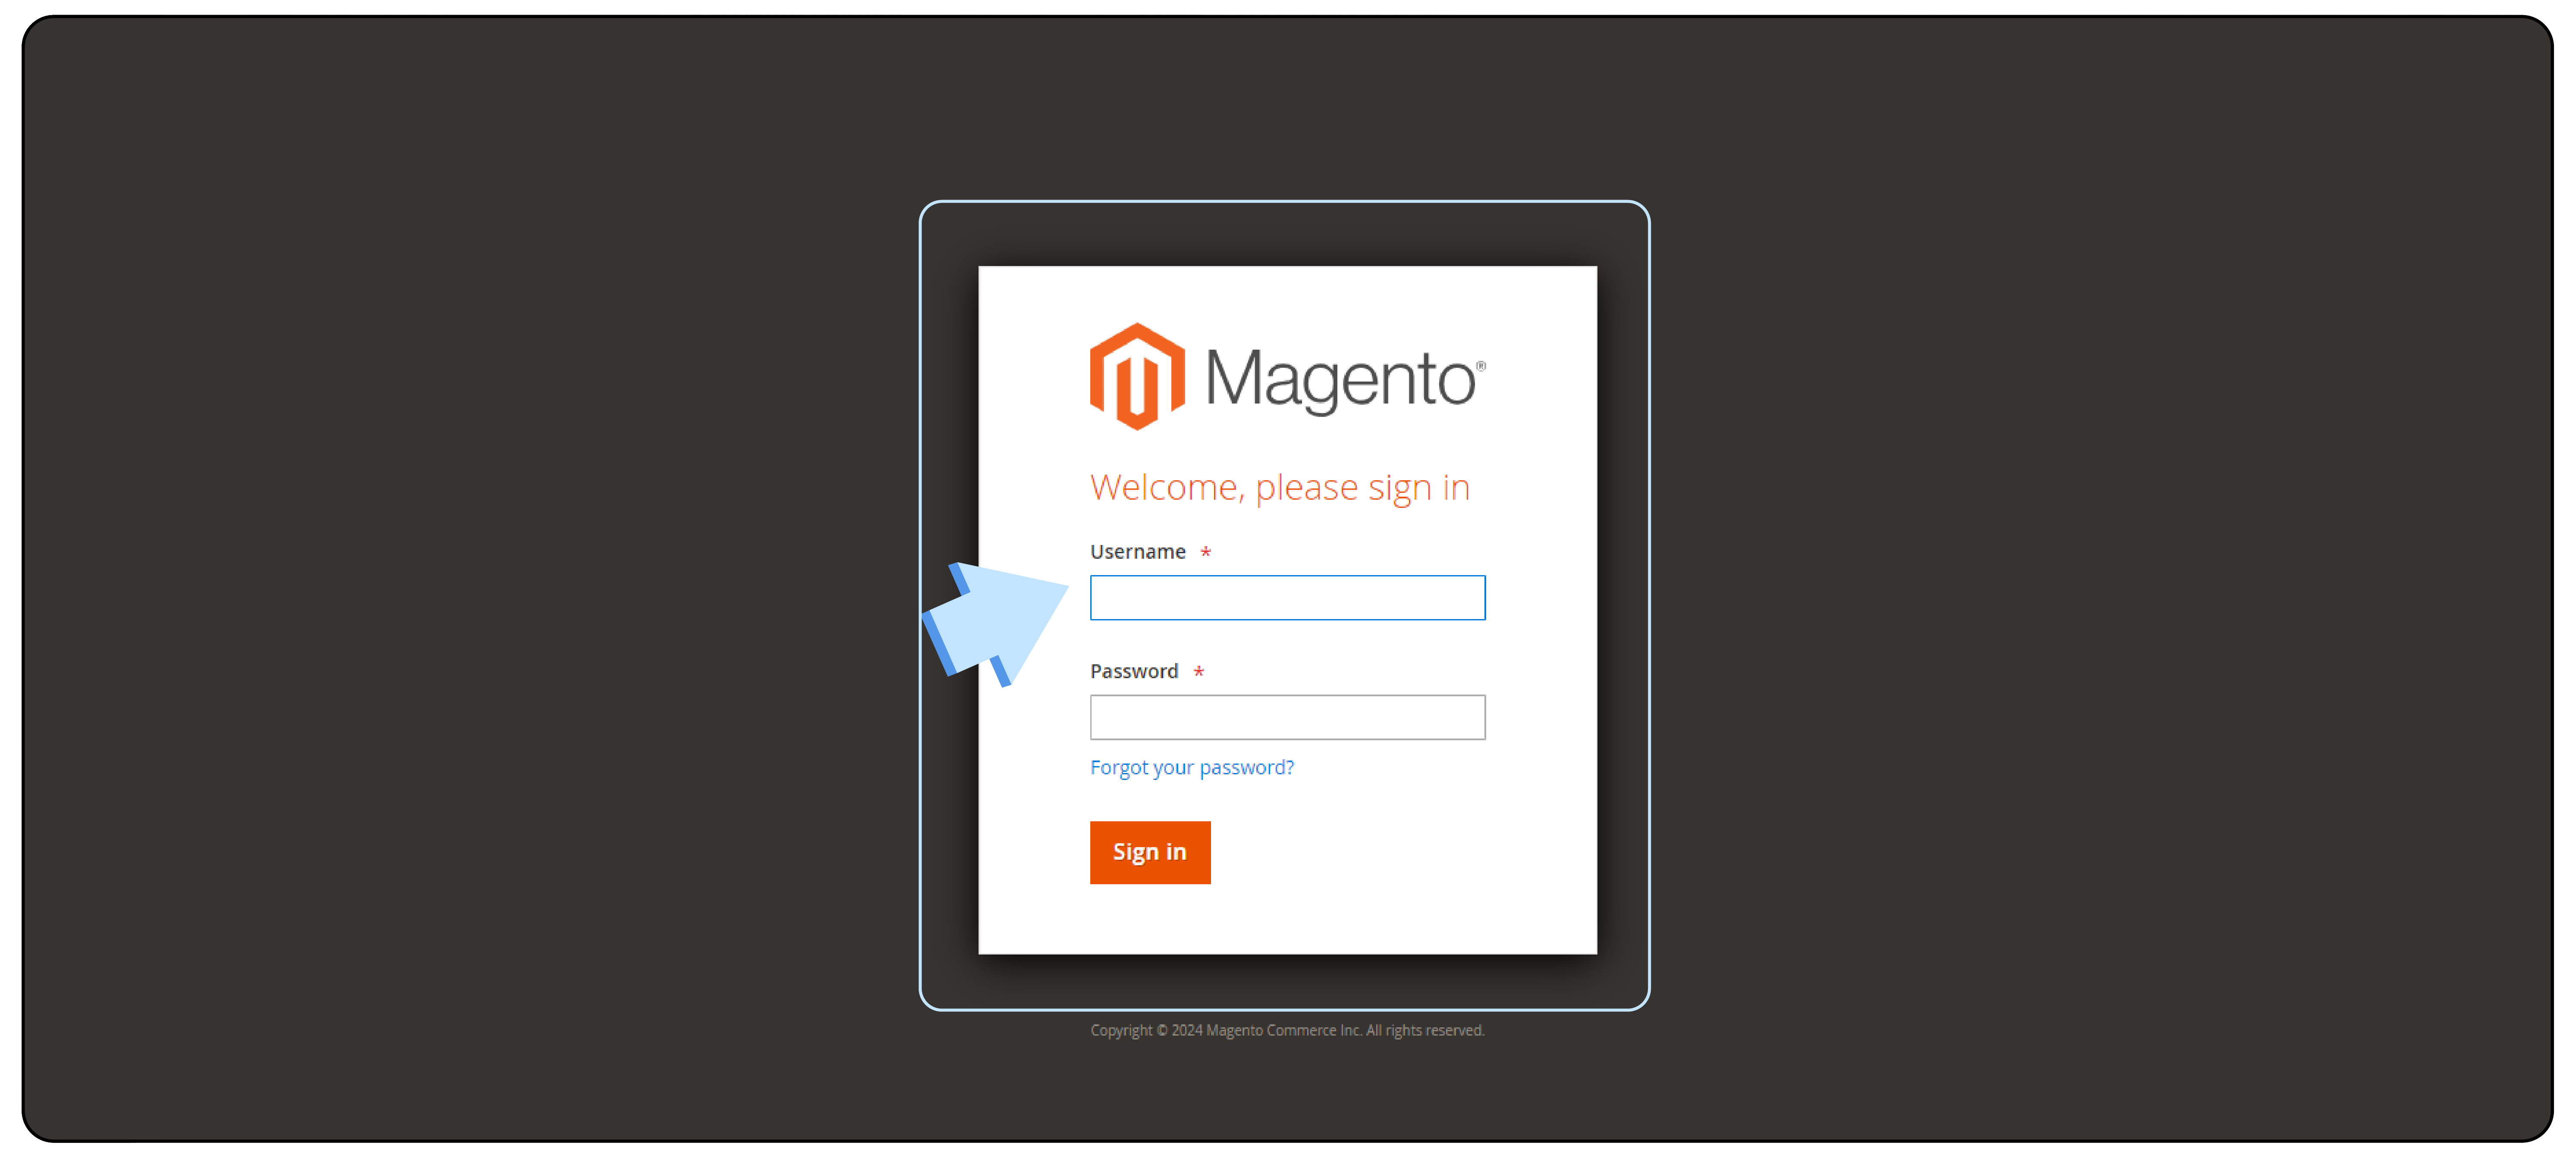 How to Configure Magento Search Engine-Log in